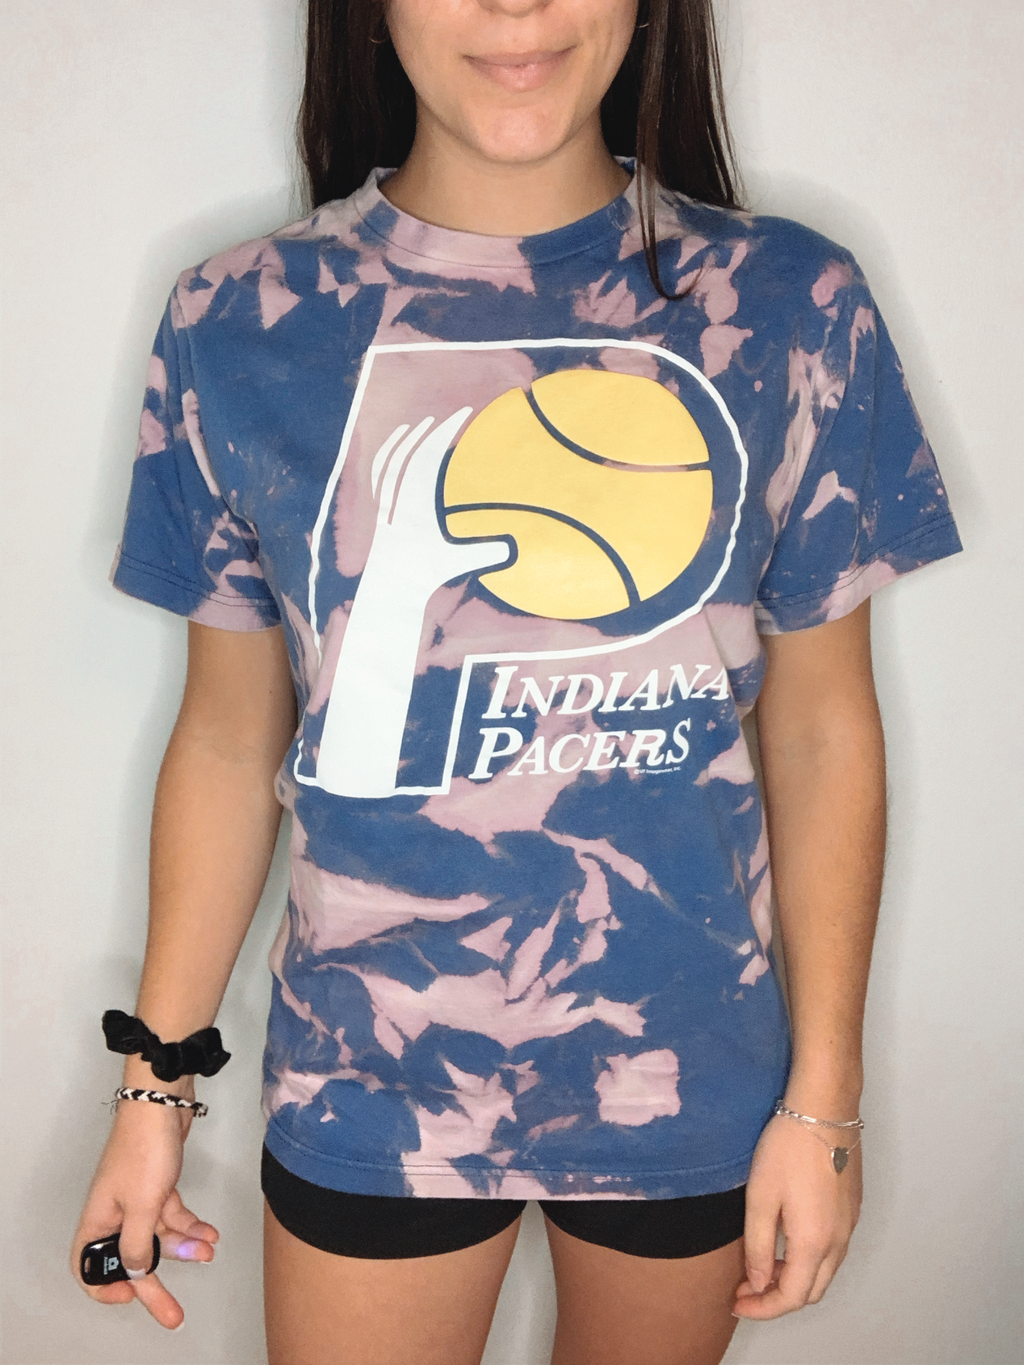 Indiana Pacers Bleached Shirt